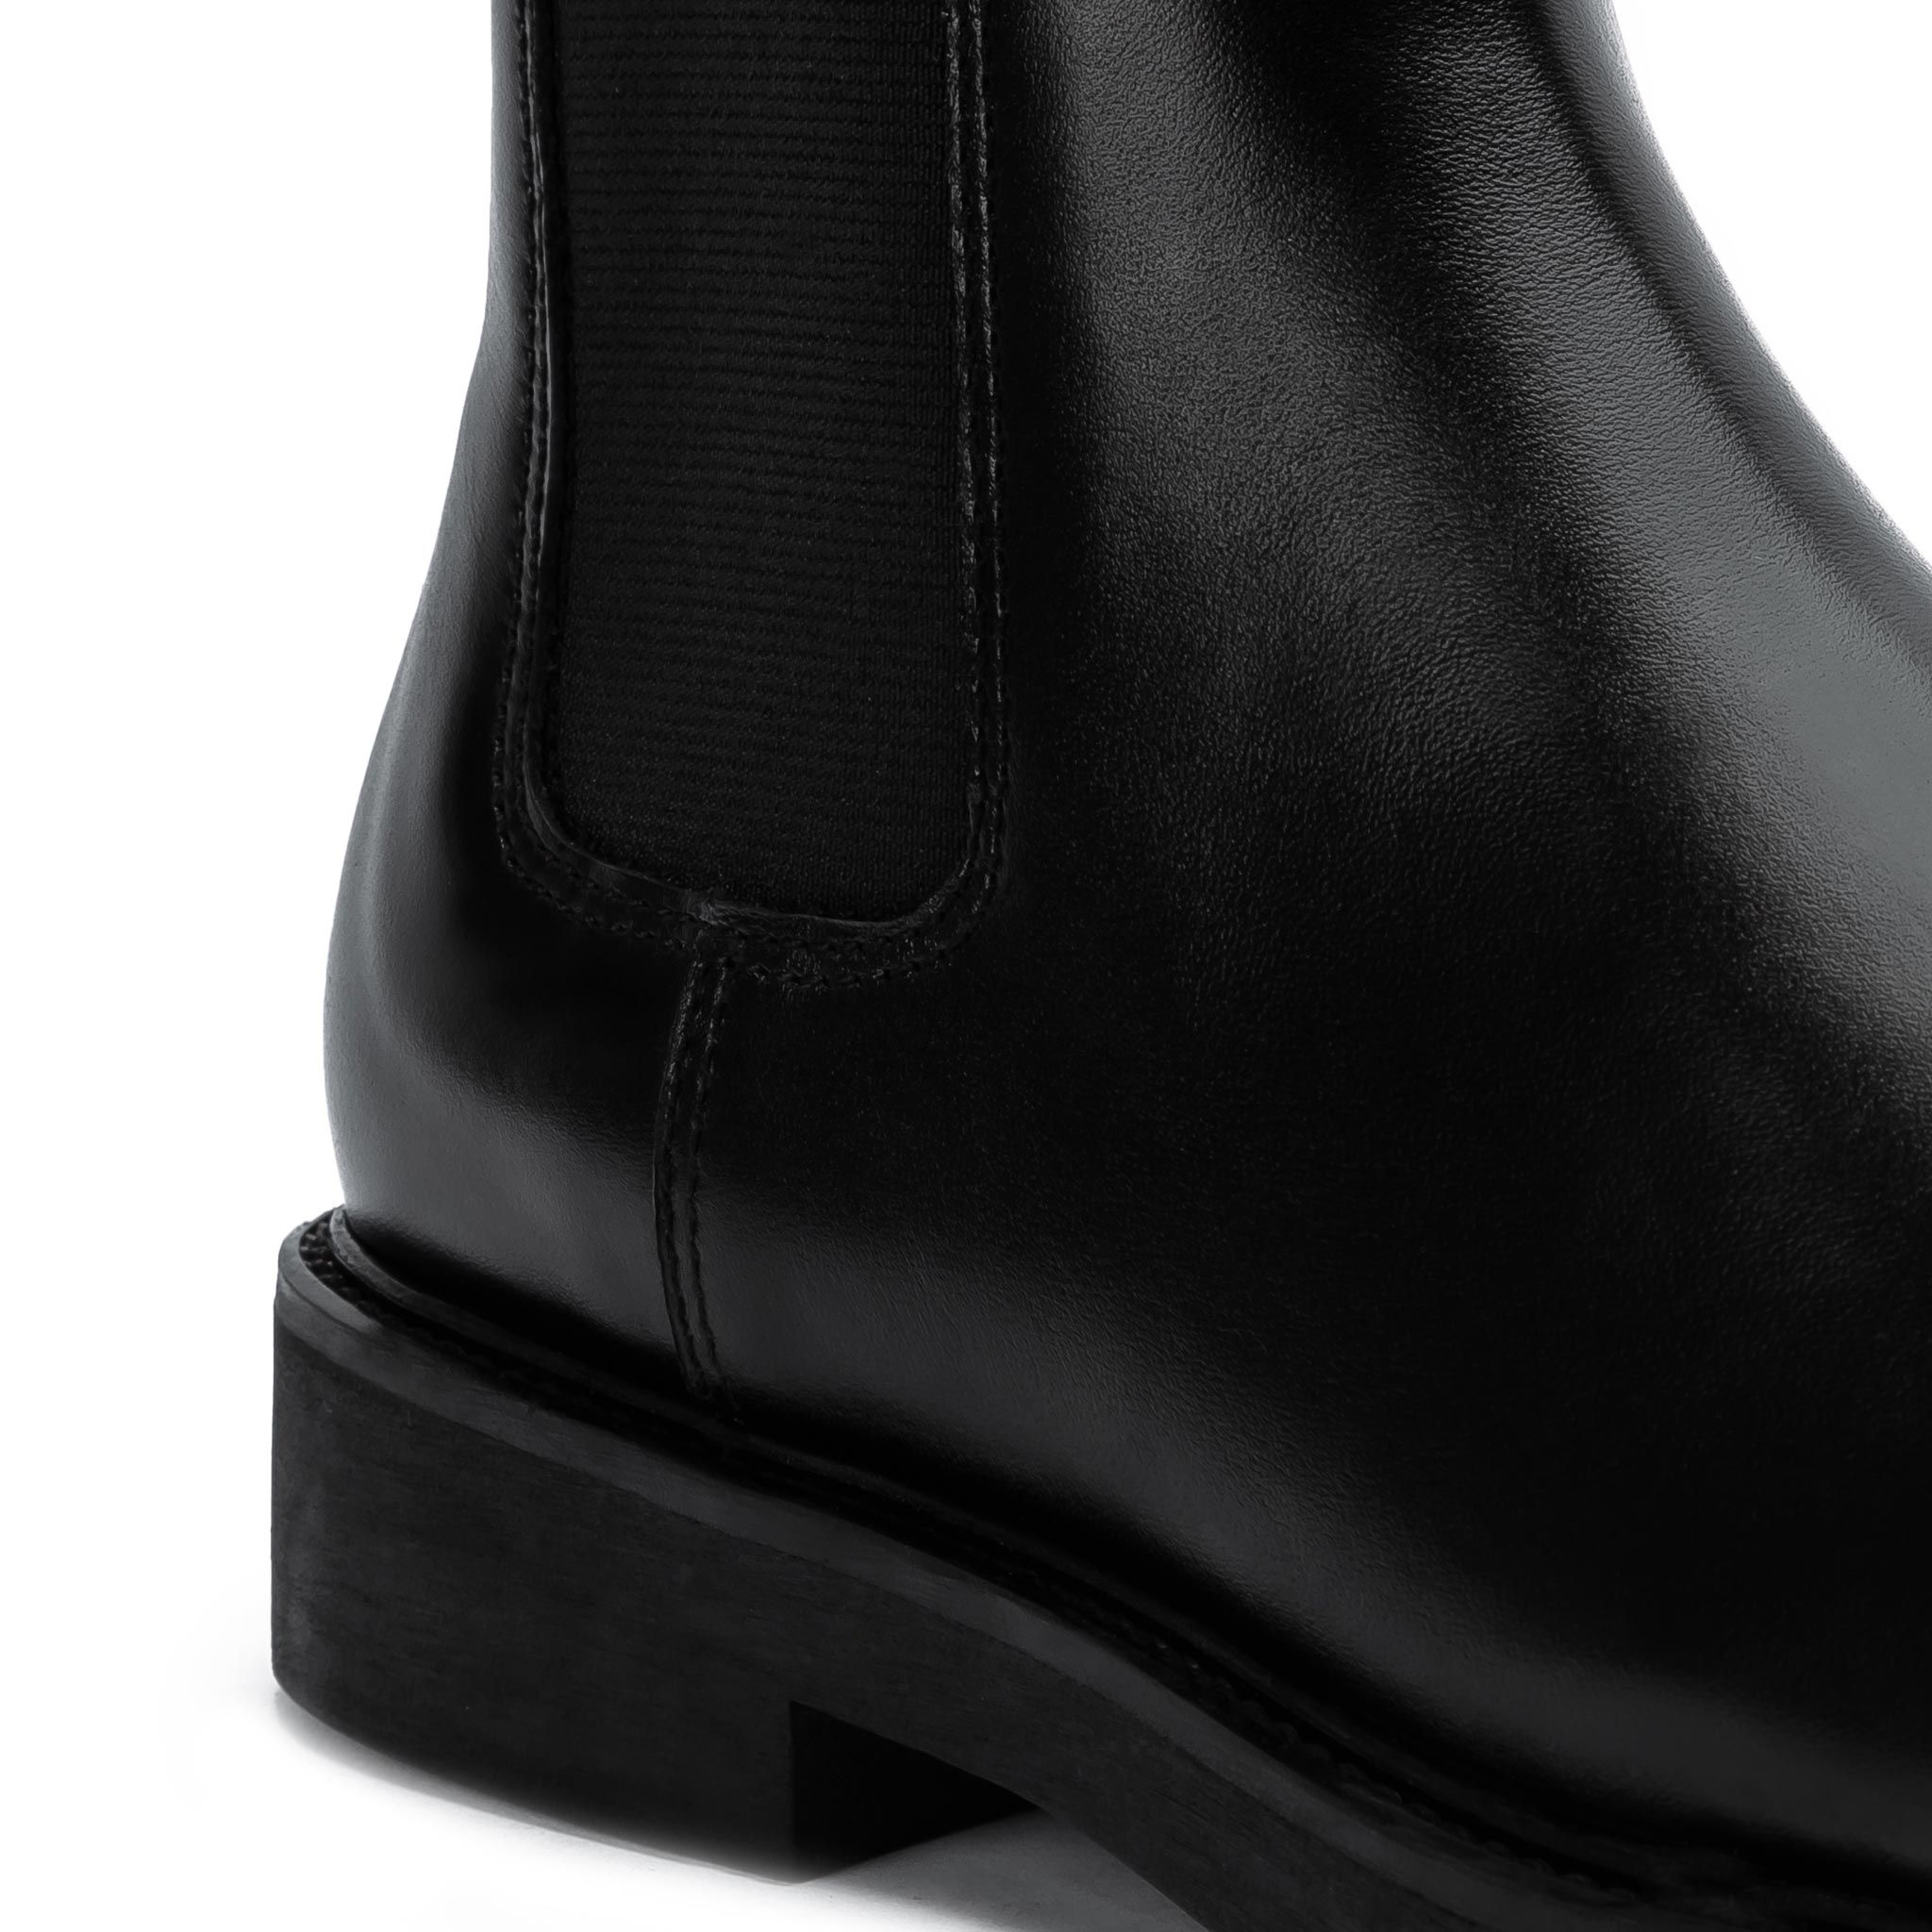  THE LADY WOLF MODERN CHELSEA BOOT - BLACK 